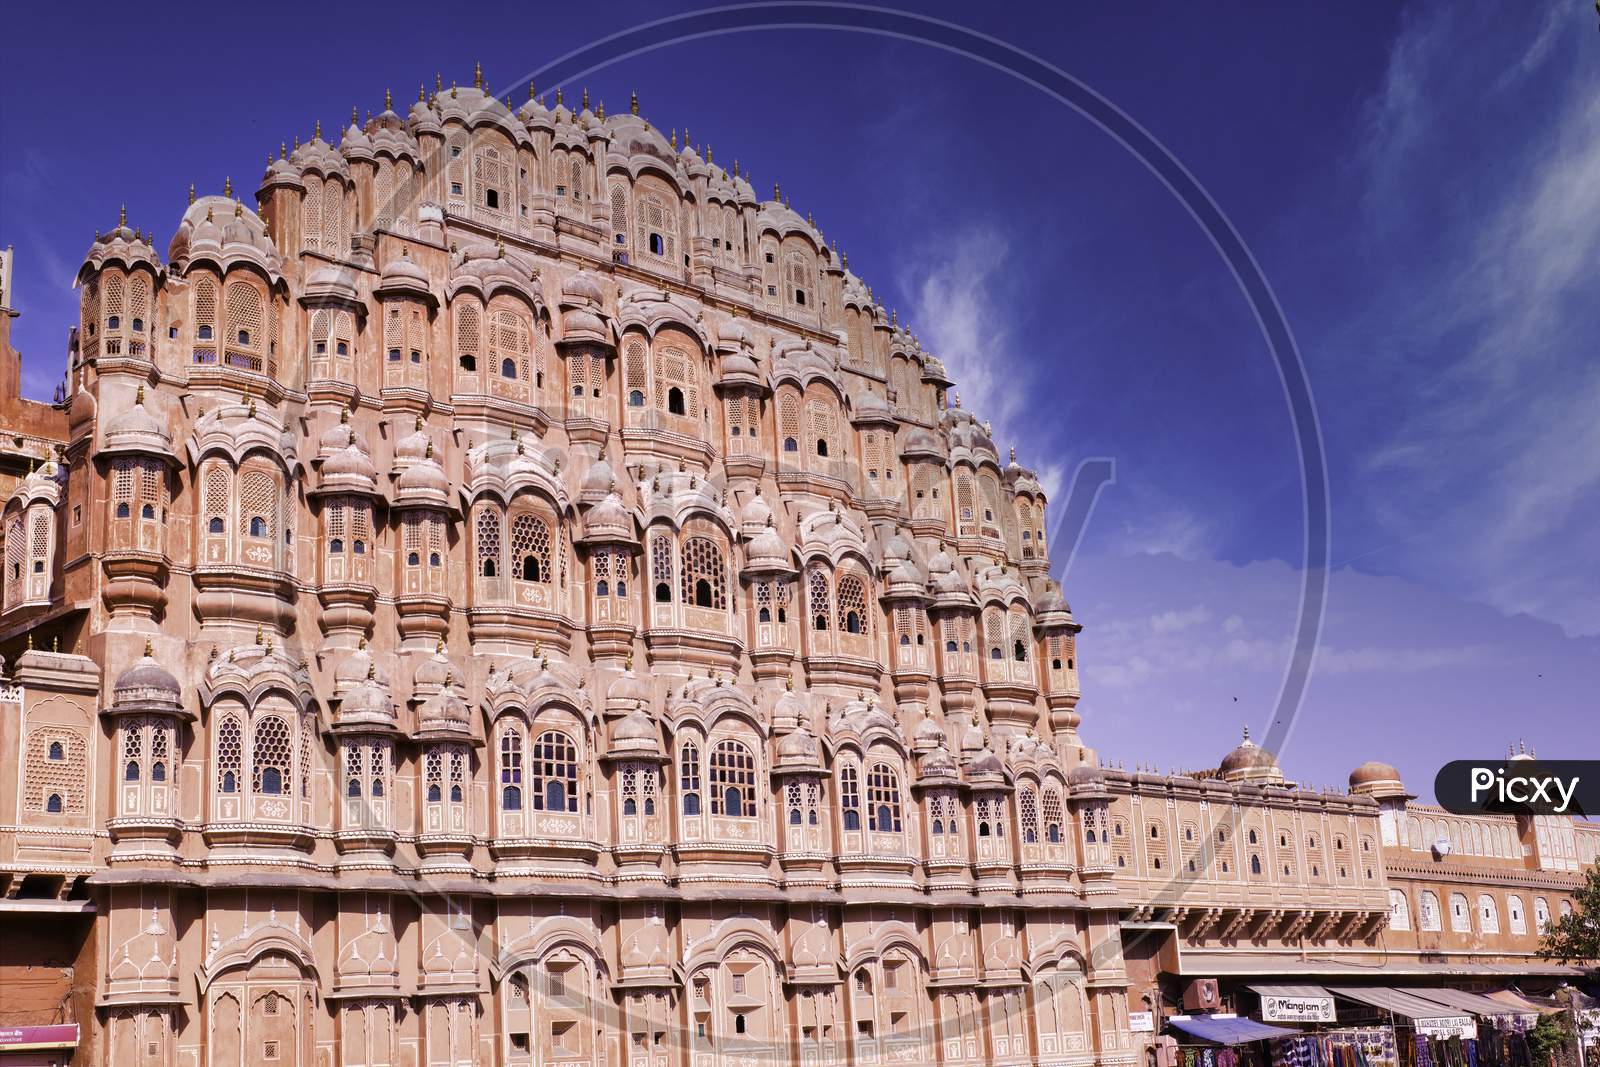 Rajasthan, India - October 07, 2012: Wide Angle Shot Of A Hawa Mahal Located In Pink City Jaipur Before Clear Blue Sky